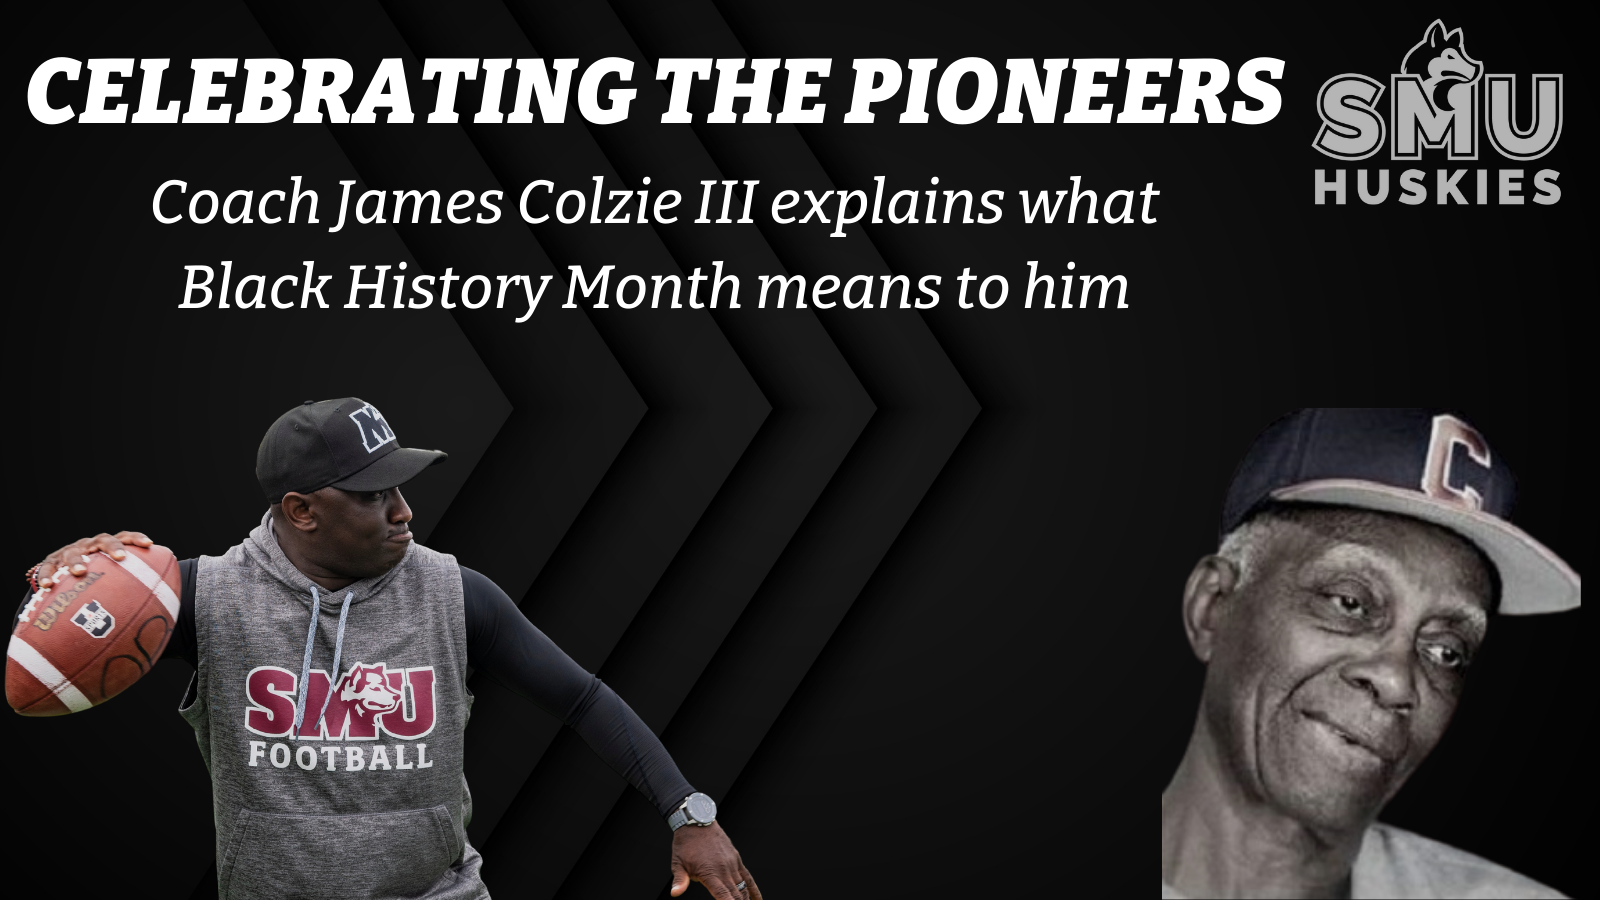 Celebrating the Pioneers: Coach Colzie reflects on significance of Black History Month